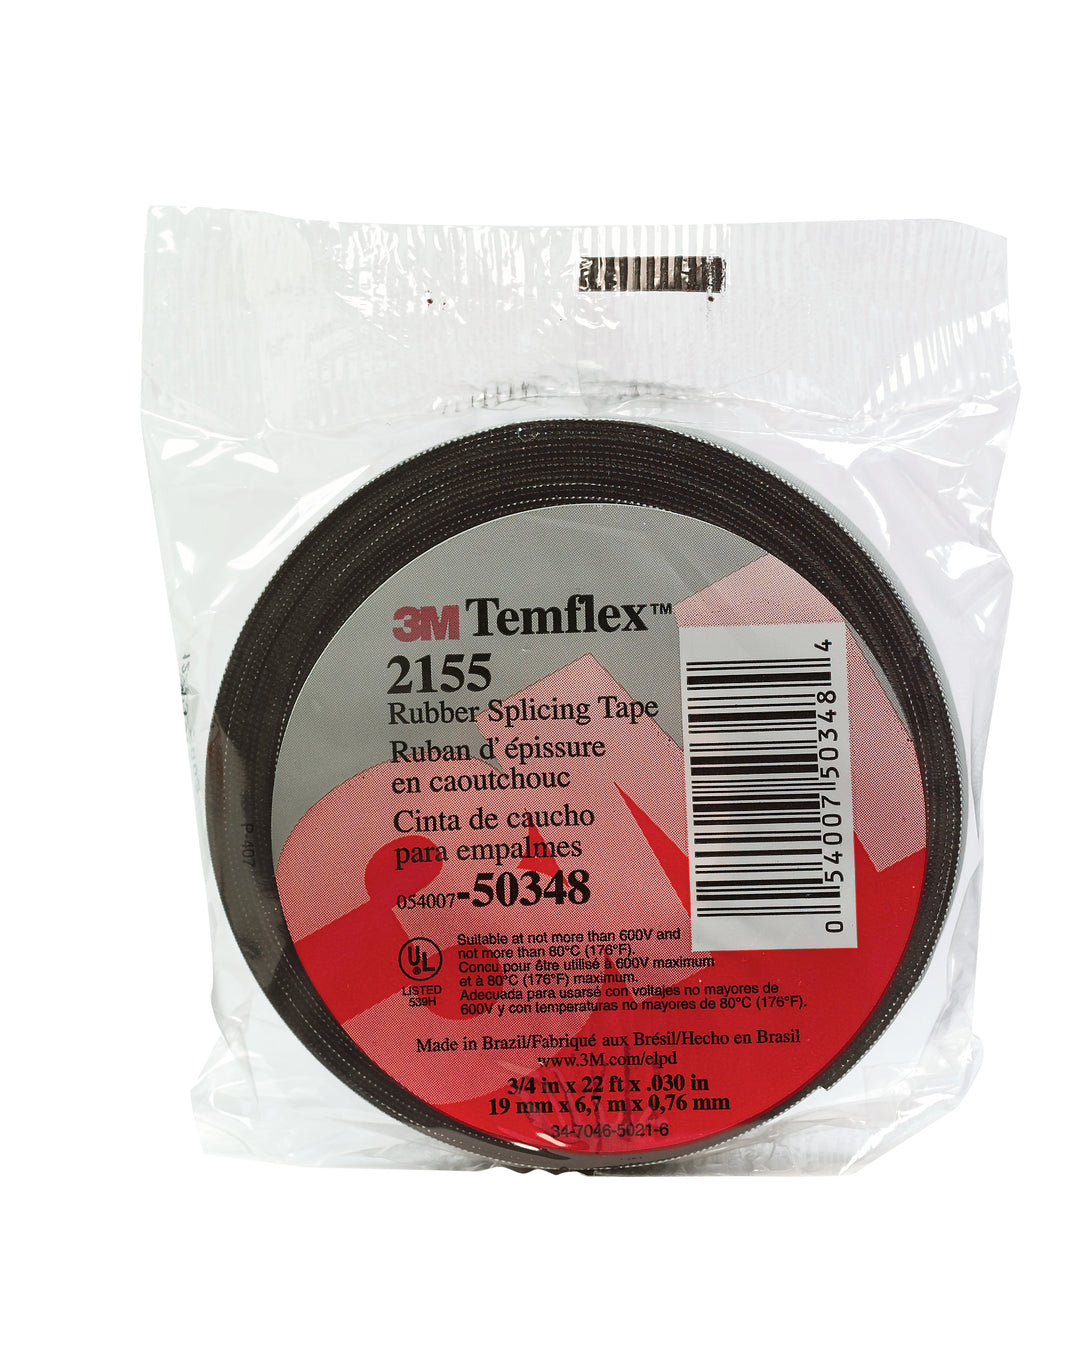 3M 2155-3/4X22FT Temflex Rubber Splicing Tape 2155 with liner black 3/4 in x 22 ft (19.1 mm x 6.7 m)